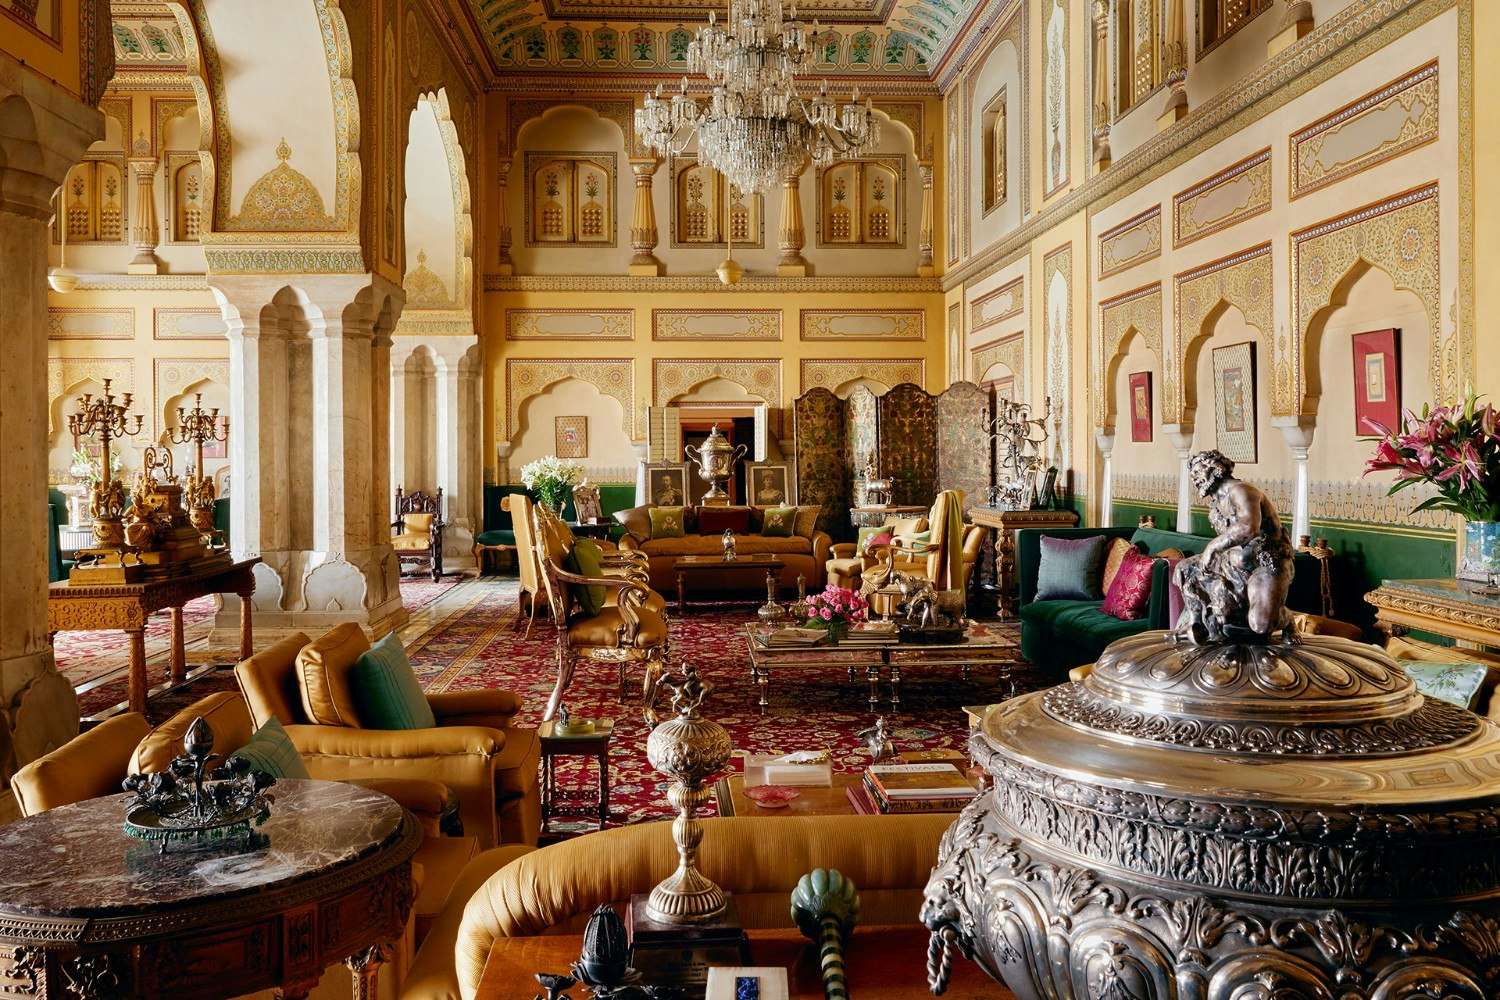 The living room of the City of Jaipur Palace